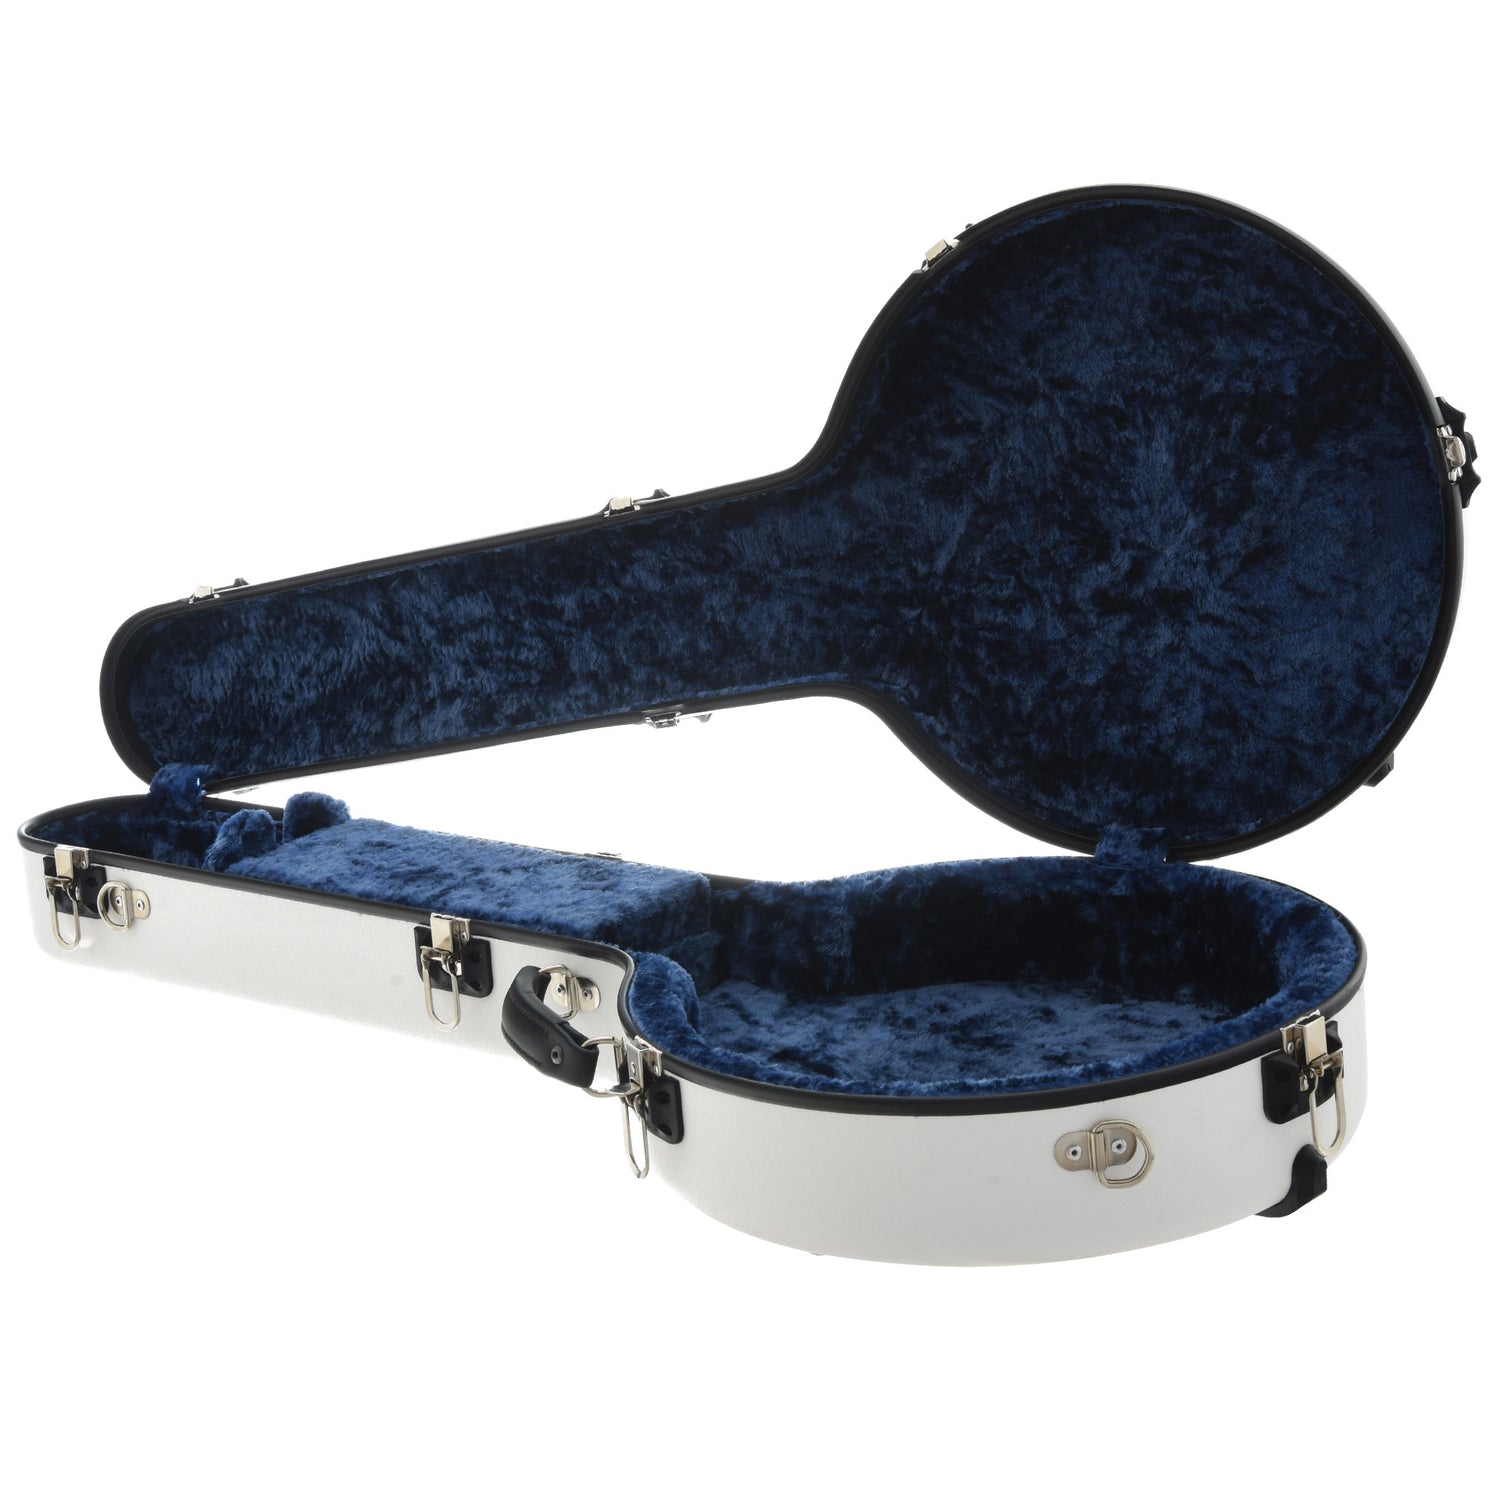 Image 2 of Calton Deluxe Banjo Case, Gibson 5-String Resonator Banjo, White w/Blue Lining - SKU# CBC1-WH/B : Product Type Accessories & Parts : Elderly Instruments